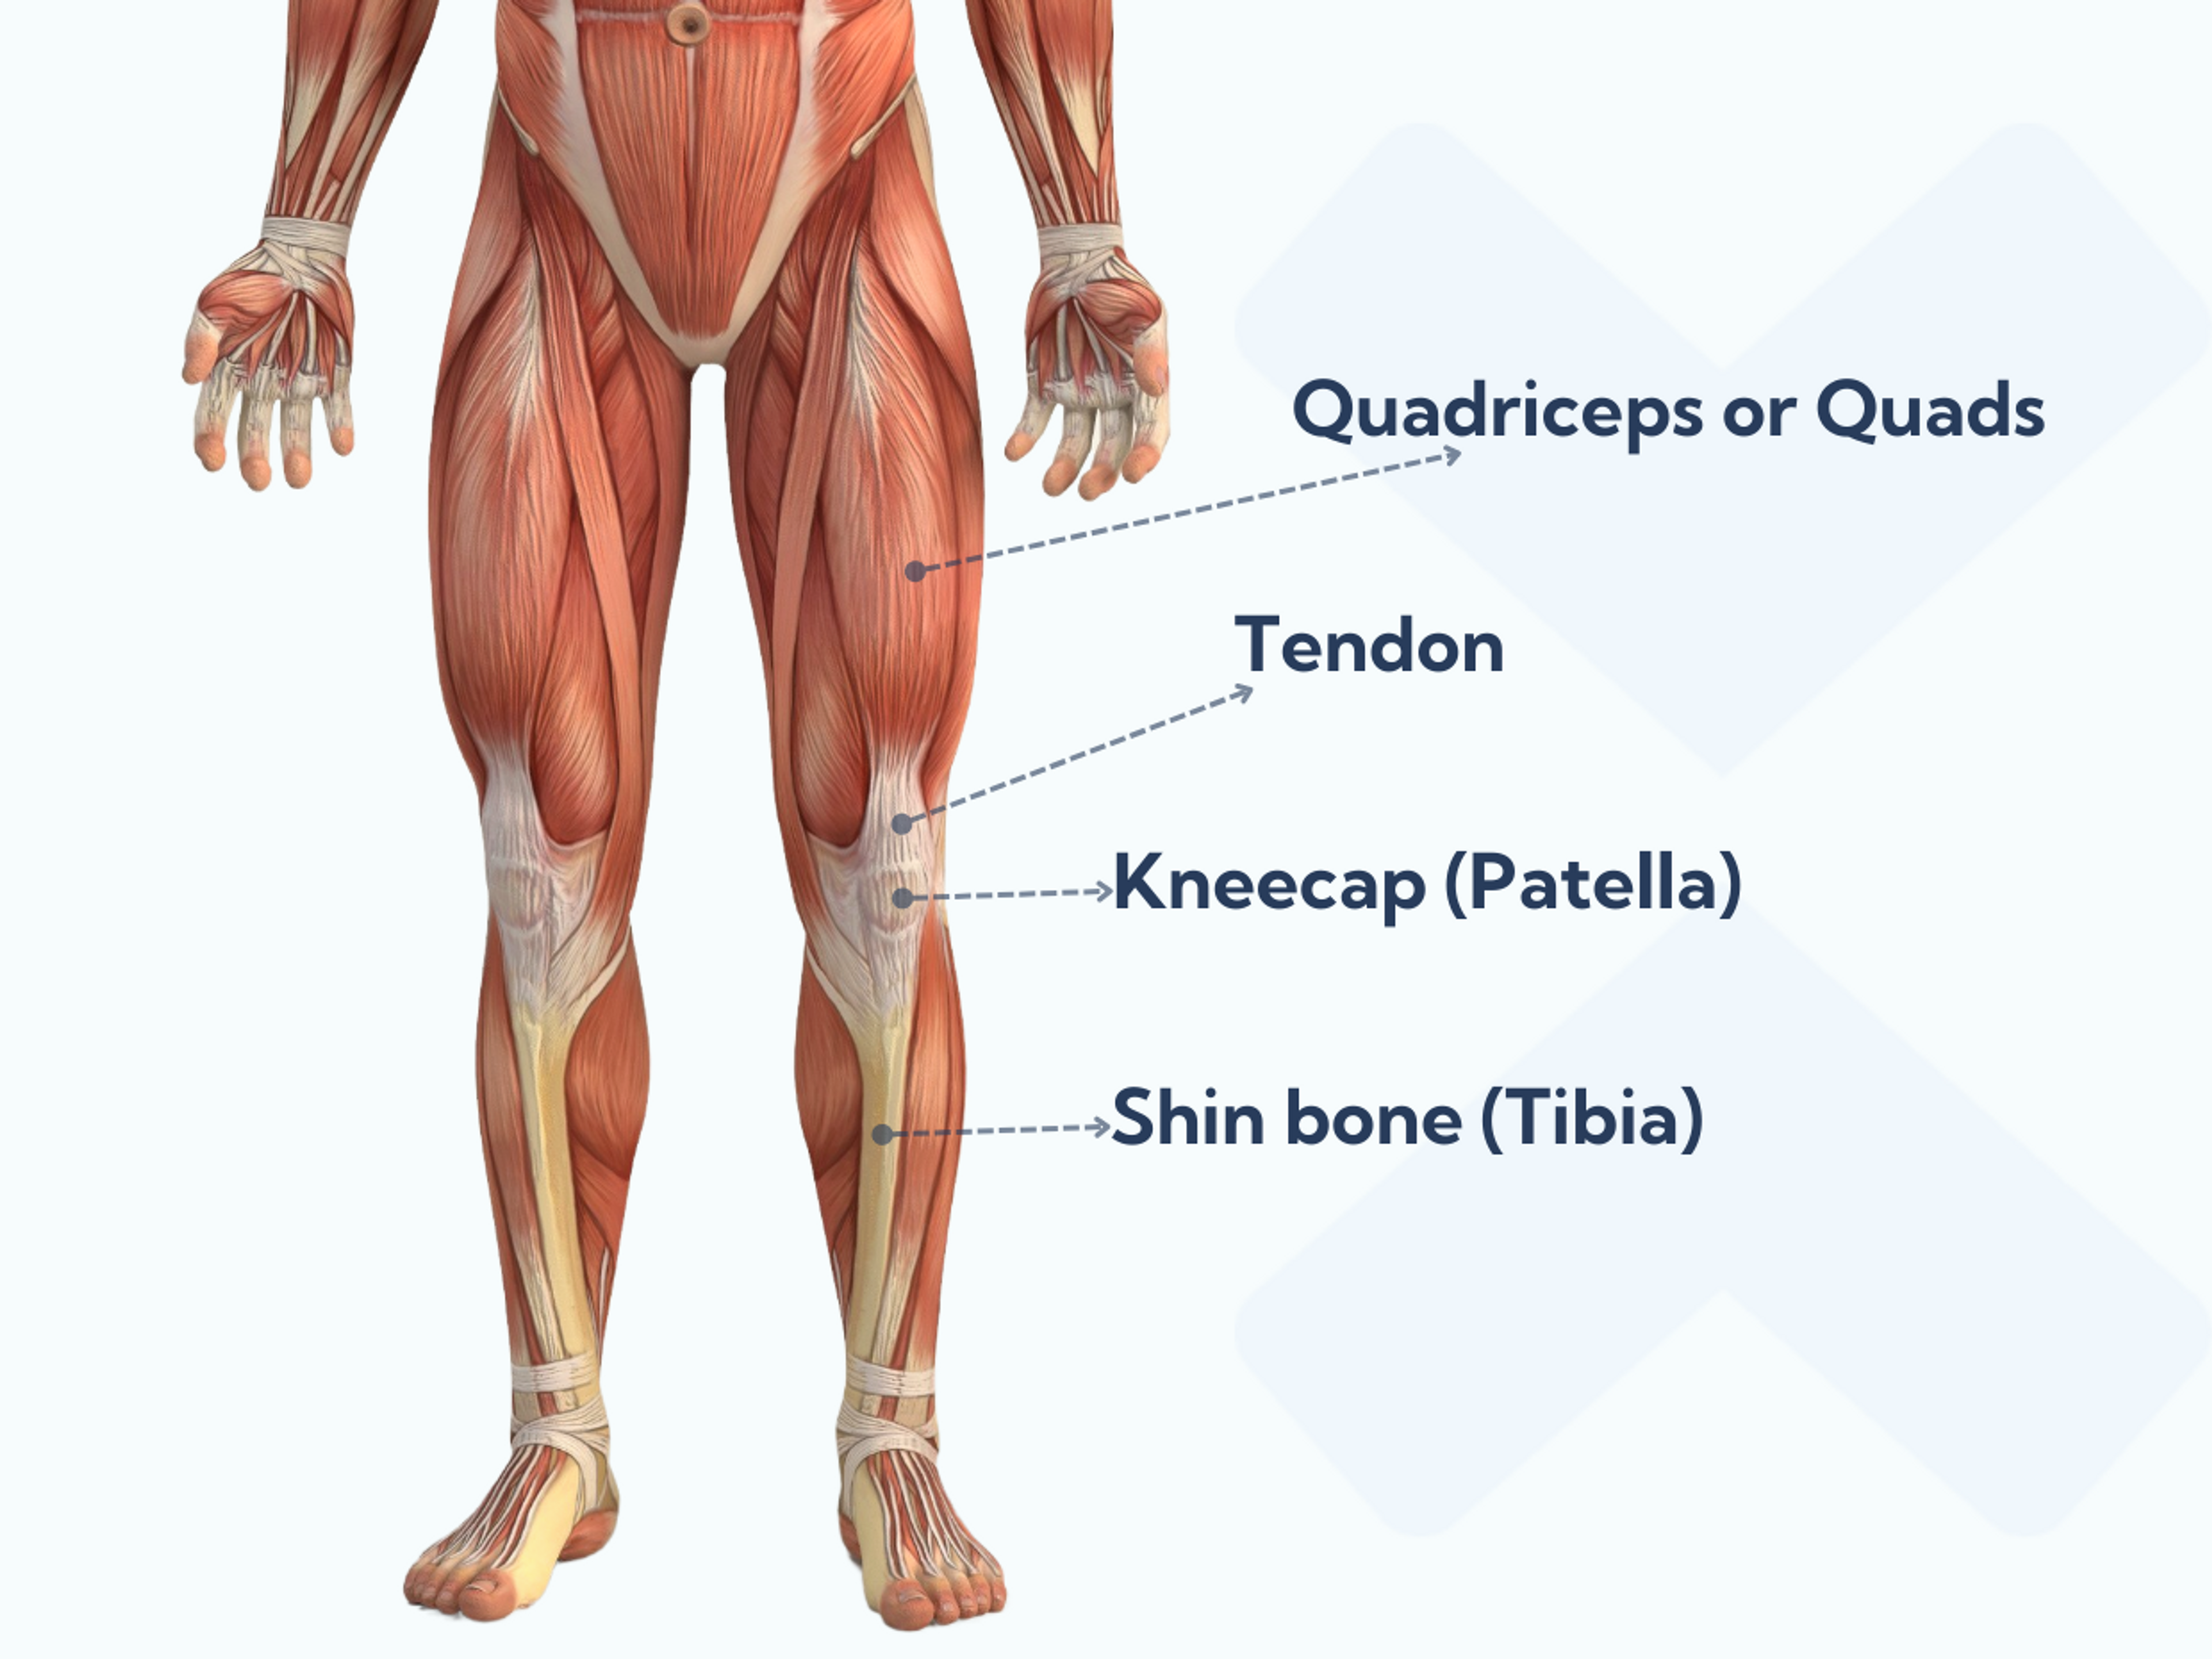 Your kneecap sits inside the tendon that connects the quadricep muscles to your lower leg.